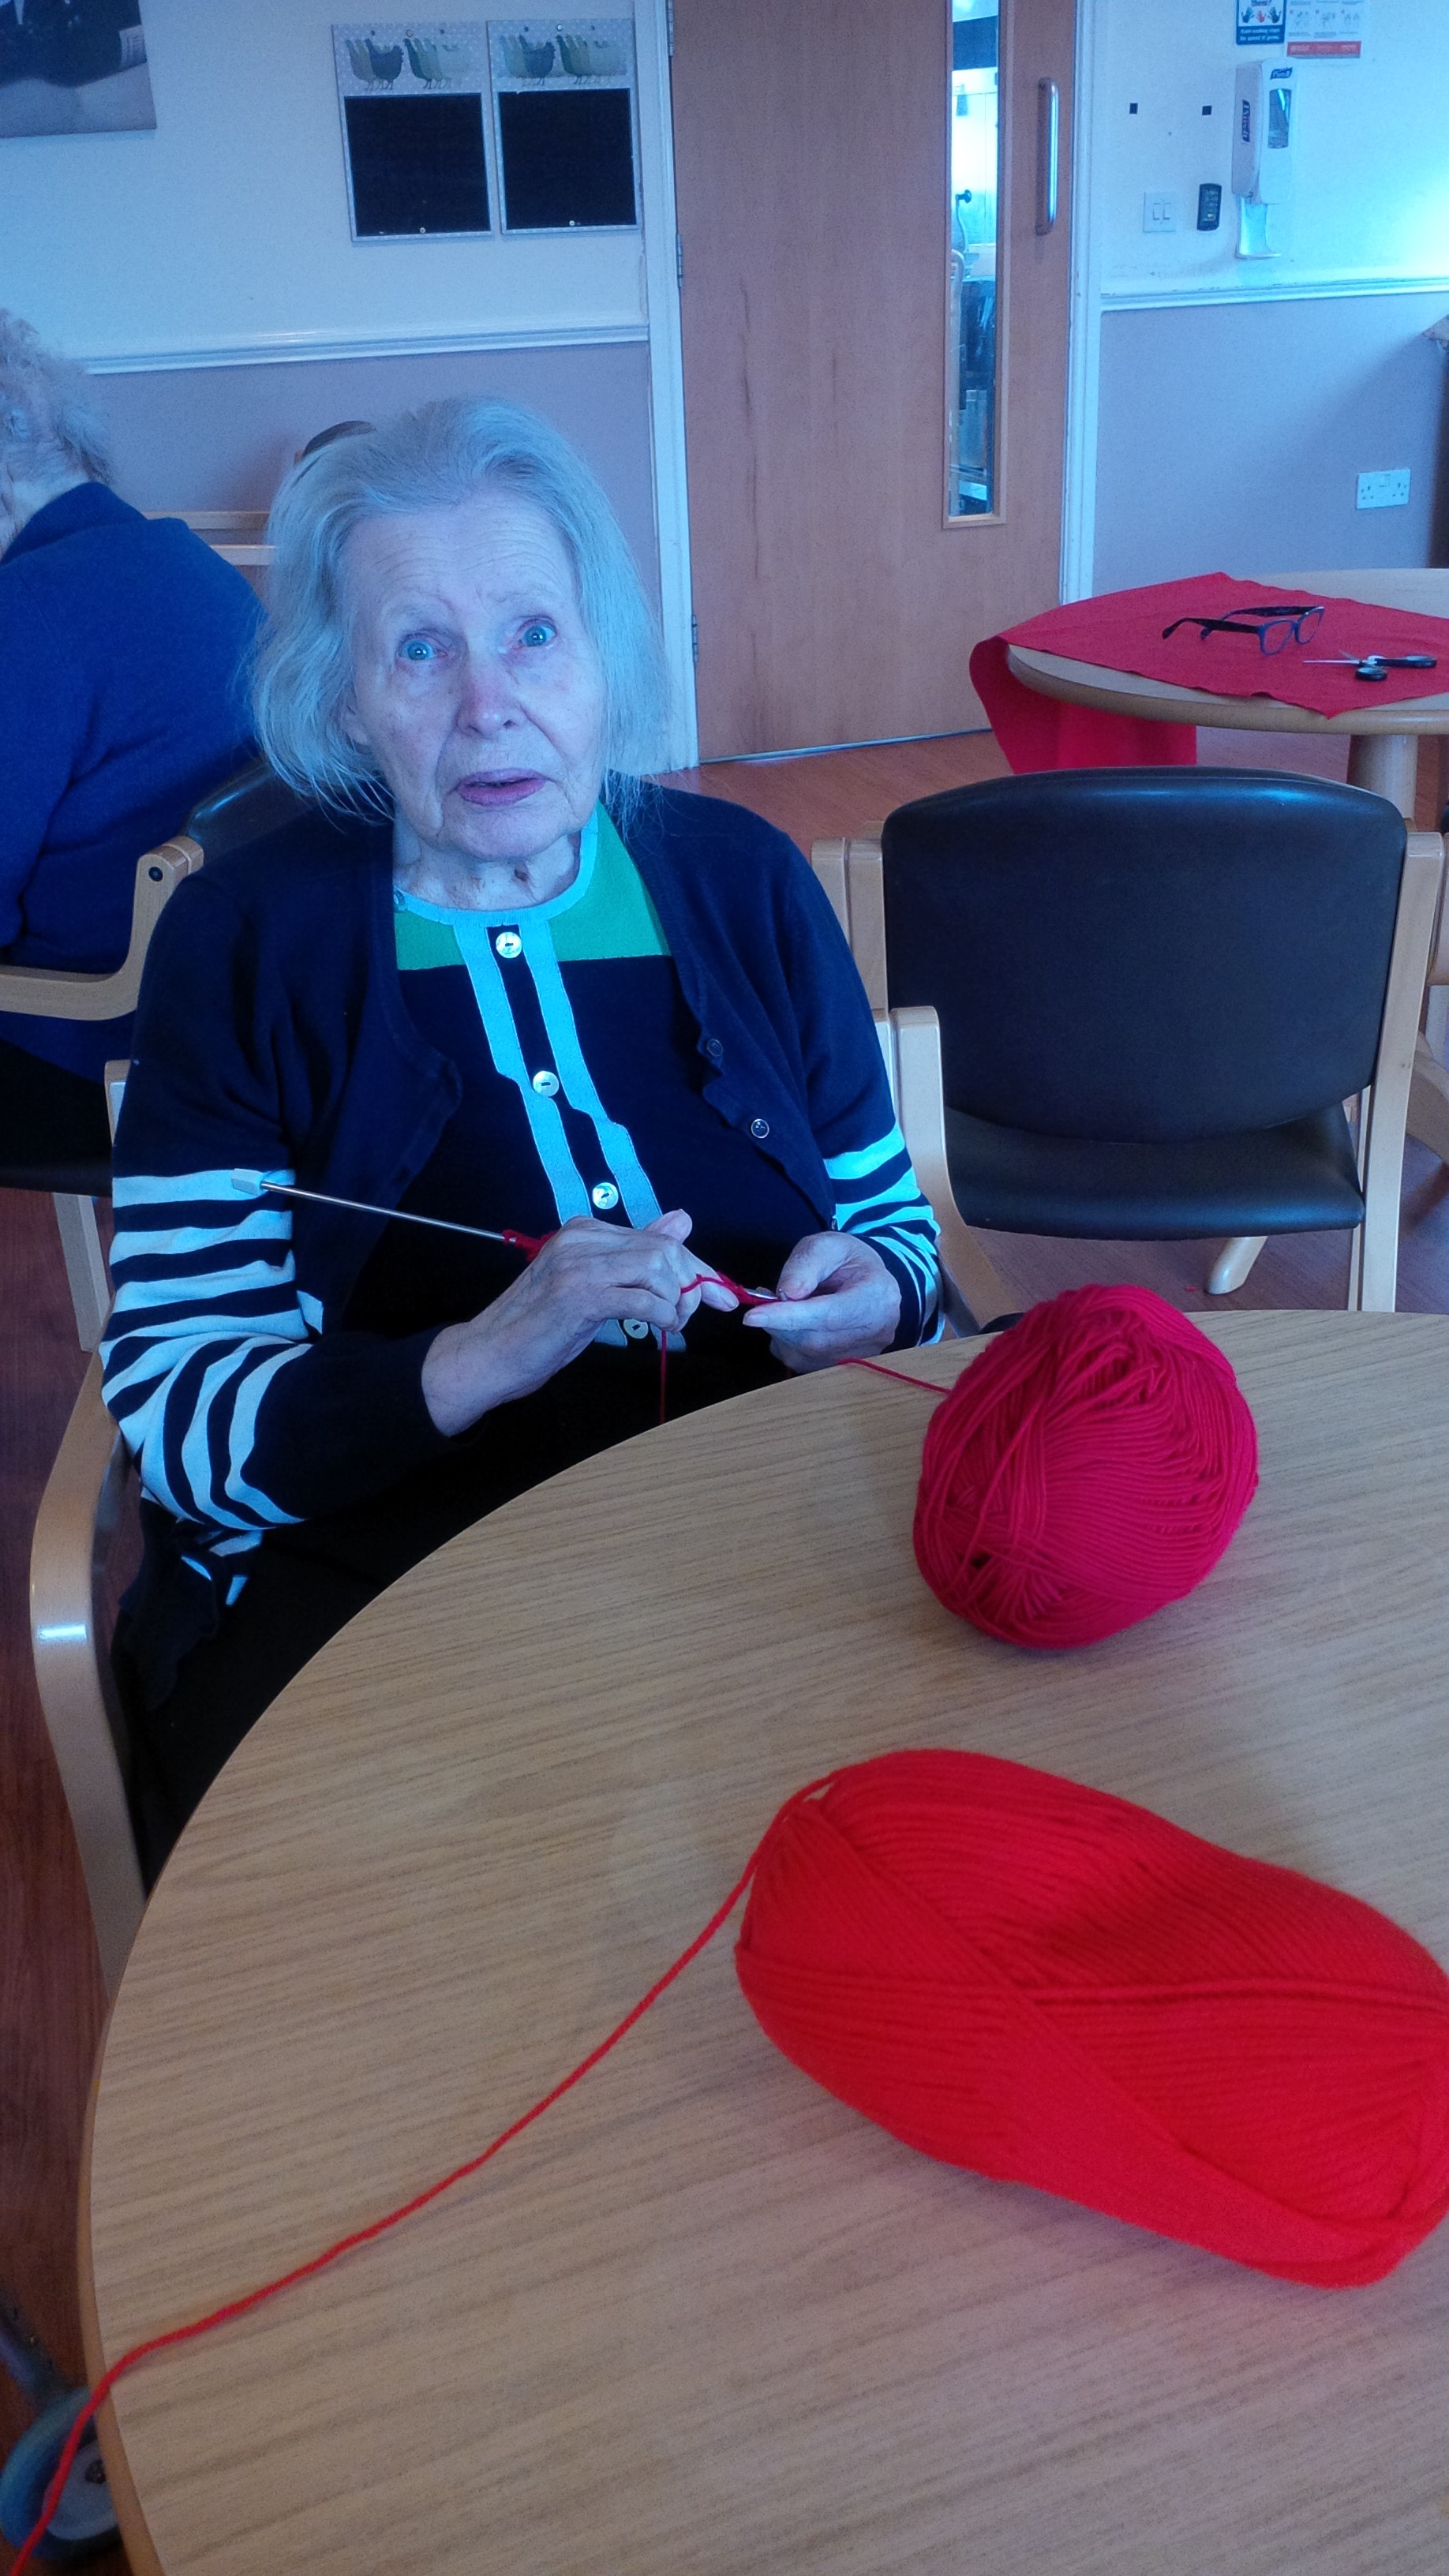 Centenary Textile Project - Poppy Making: Key Healthcare is dedicated to caring for elderly residents in safe. We have multiple dementia care homes including our care home middlesbrough, our care home St. Helen and care home saltburn. We excel in monitoring and improving care levels.